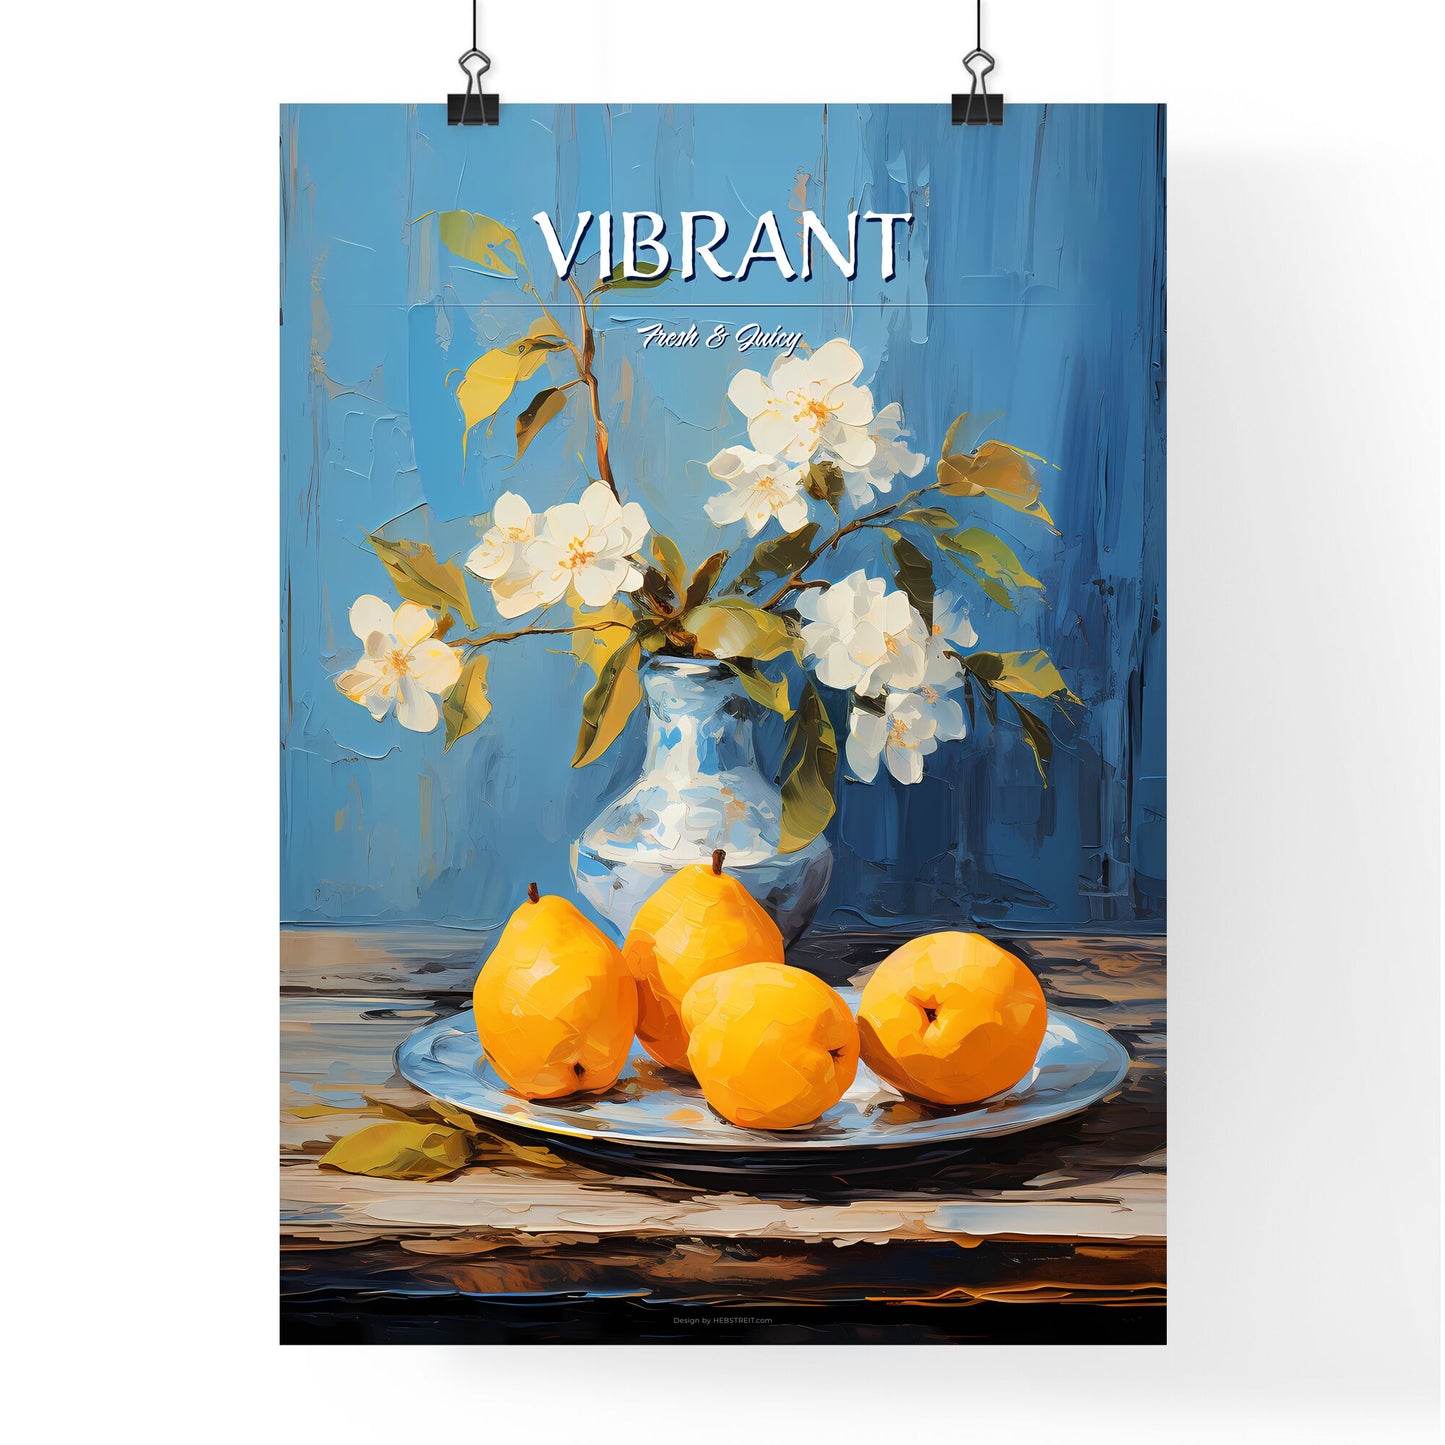 One Yellow Ripe Quince On The Blue Plate - A Painting Of Fruit In A Vase And Flowers In A Vase Default Title